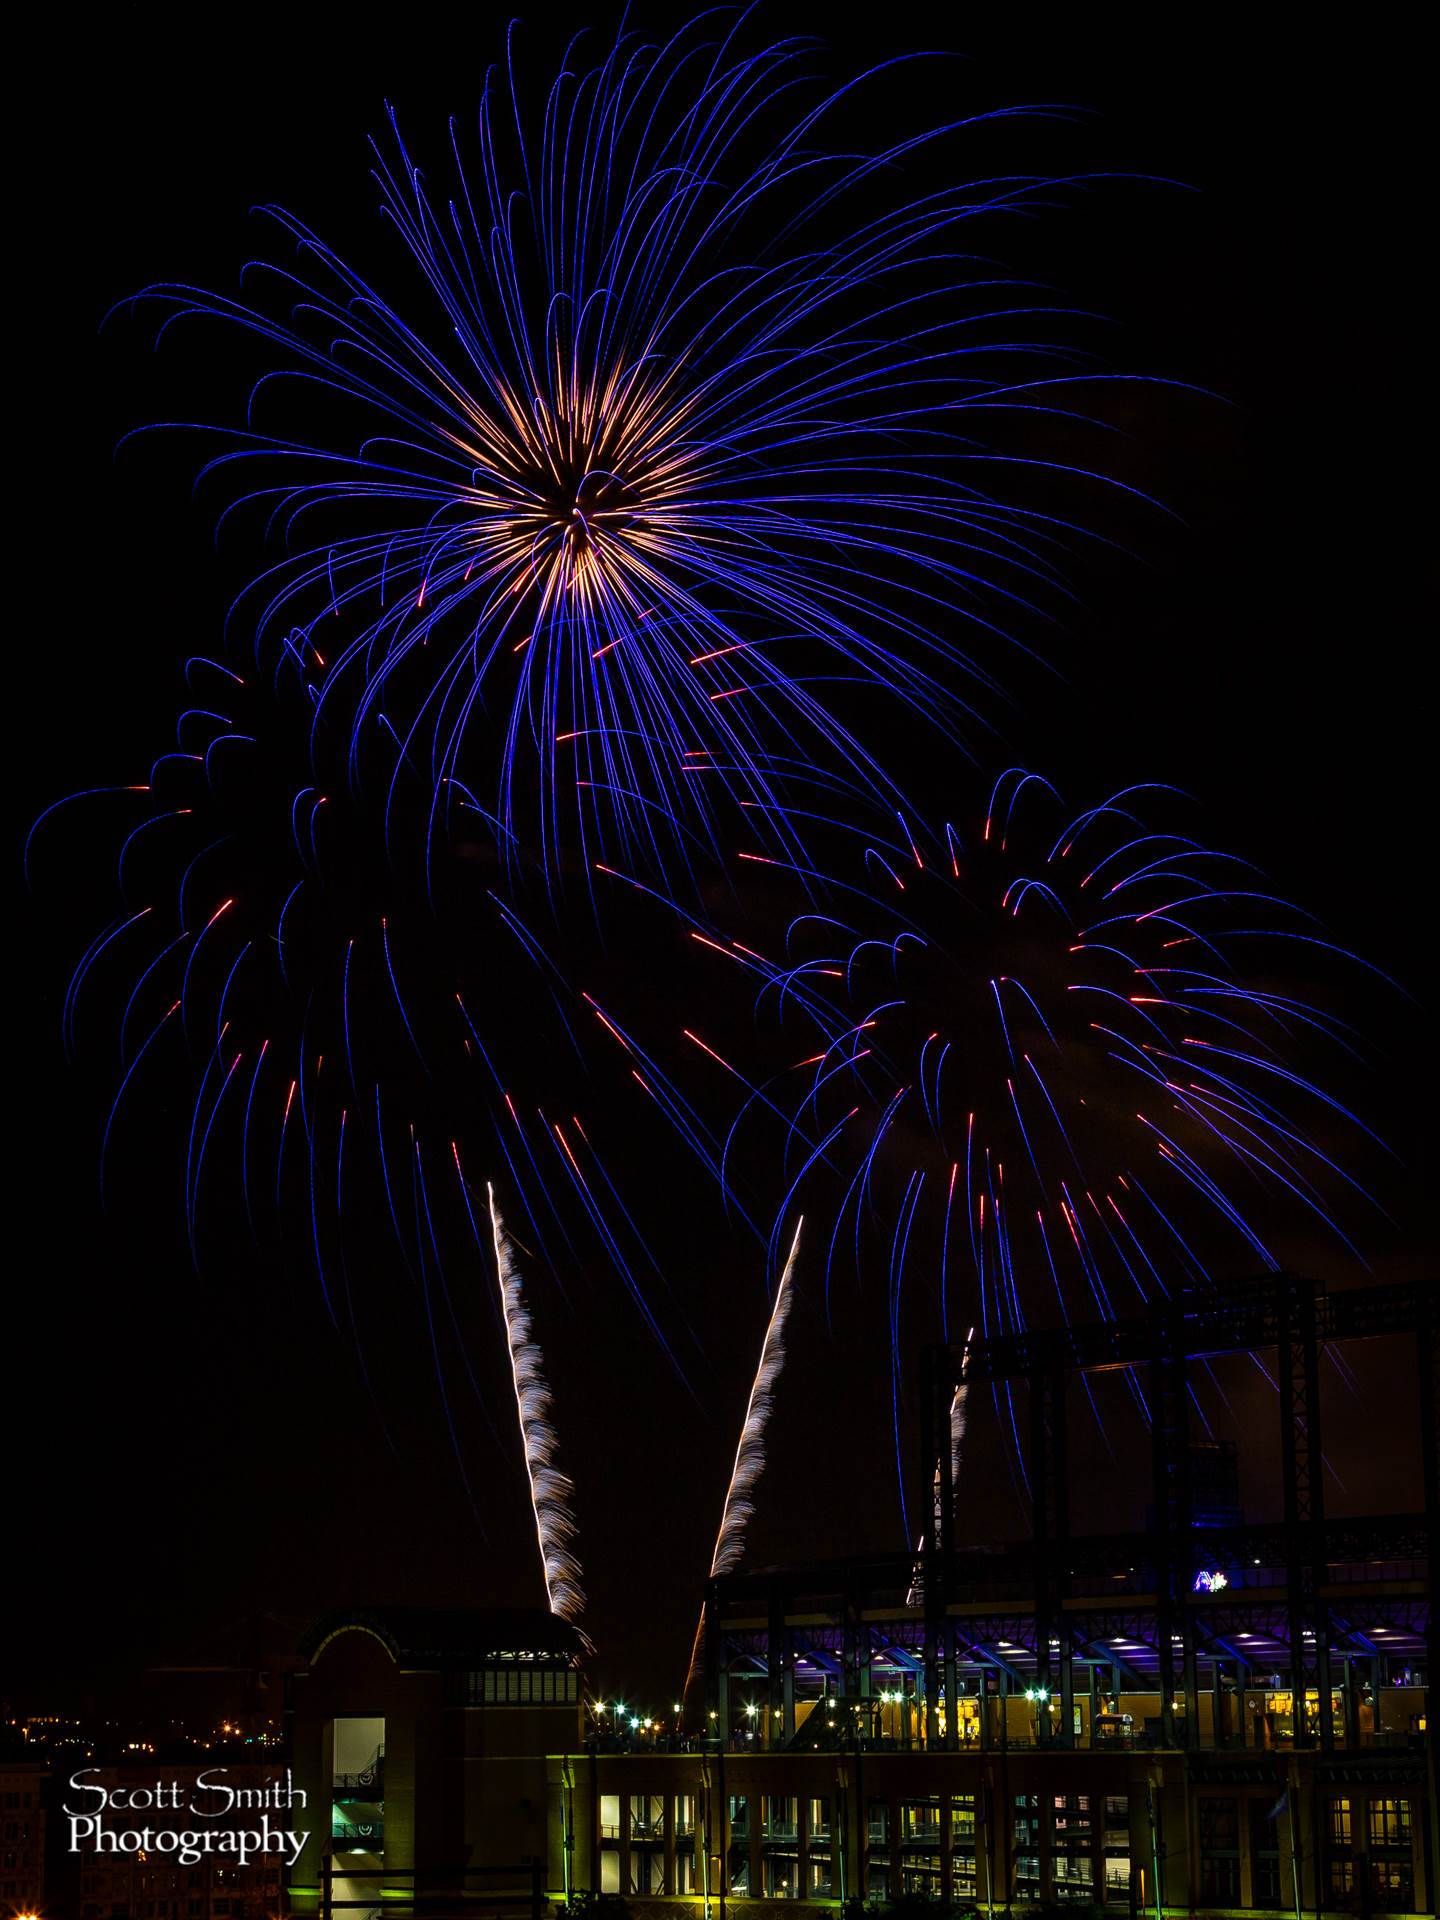 Fireworks over Coors Field 3 - Fourth of July fireworks over Coors Field after a Colorado Rockies game. by Scott Smith Photos